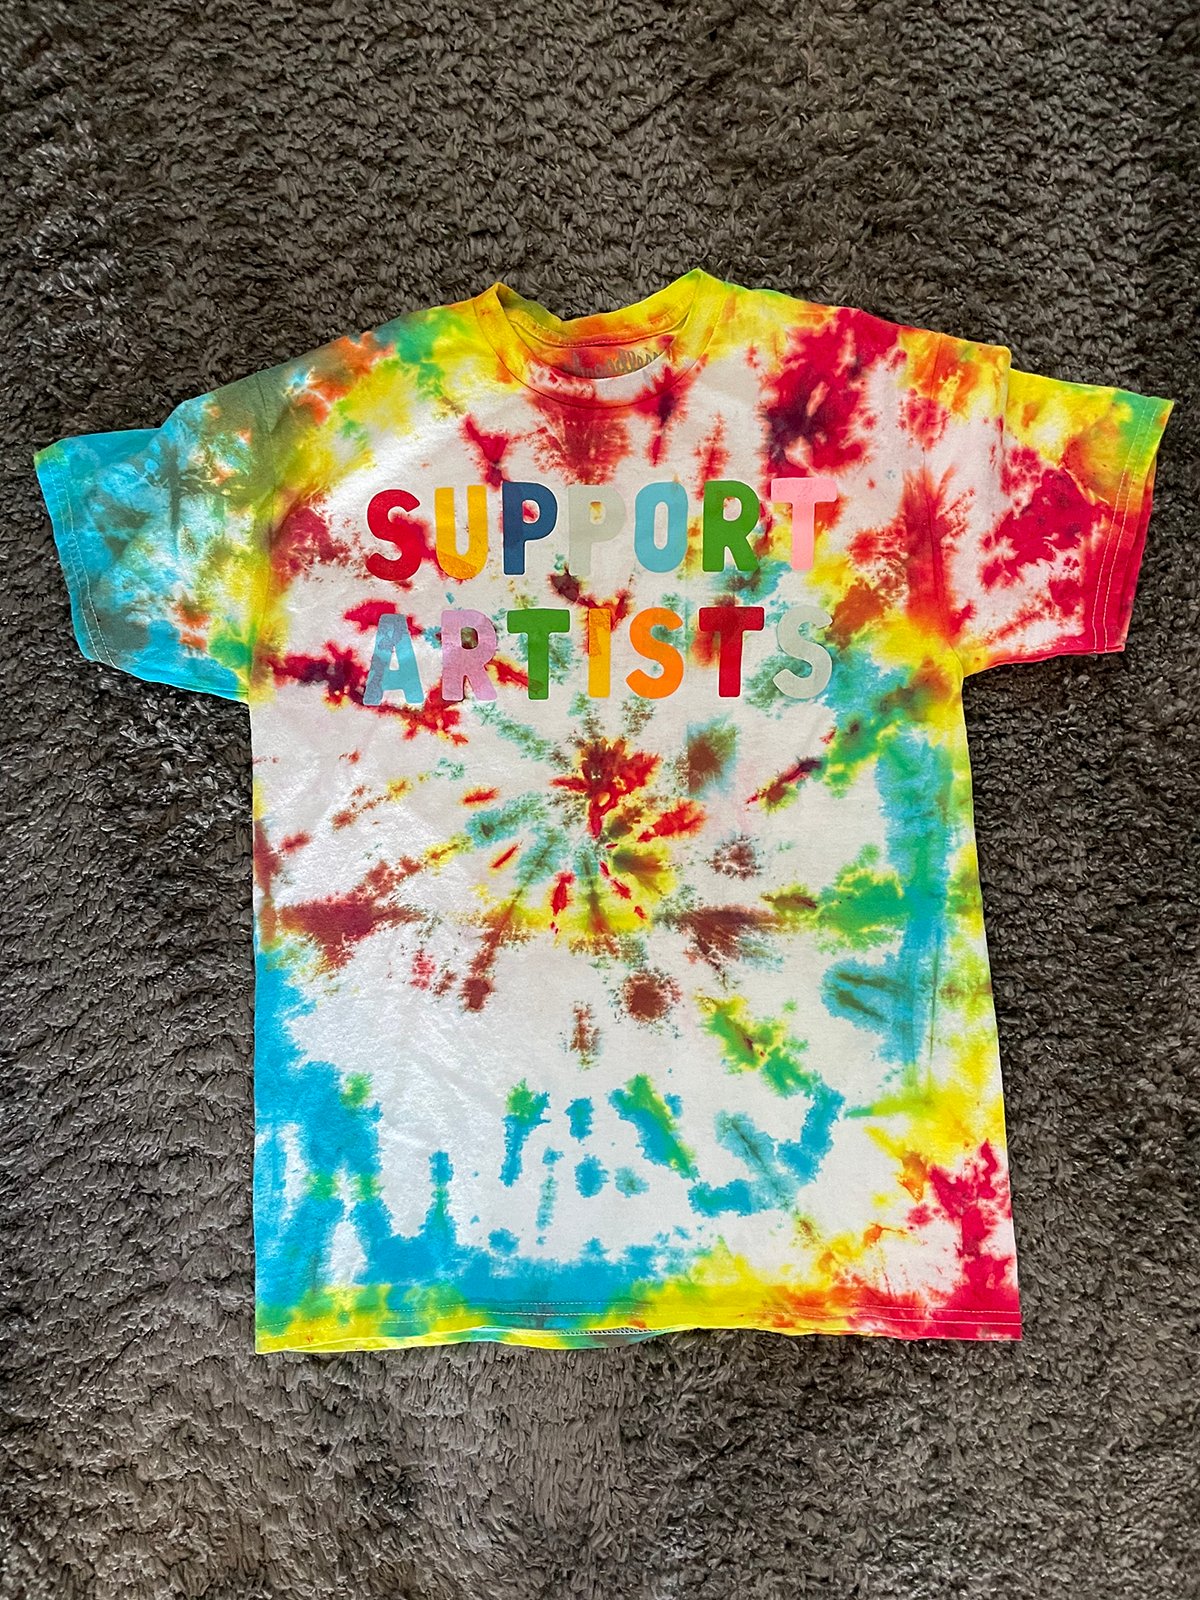 Completed DIY spiral tie dye t shirt